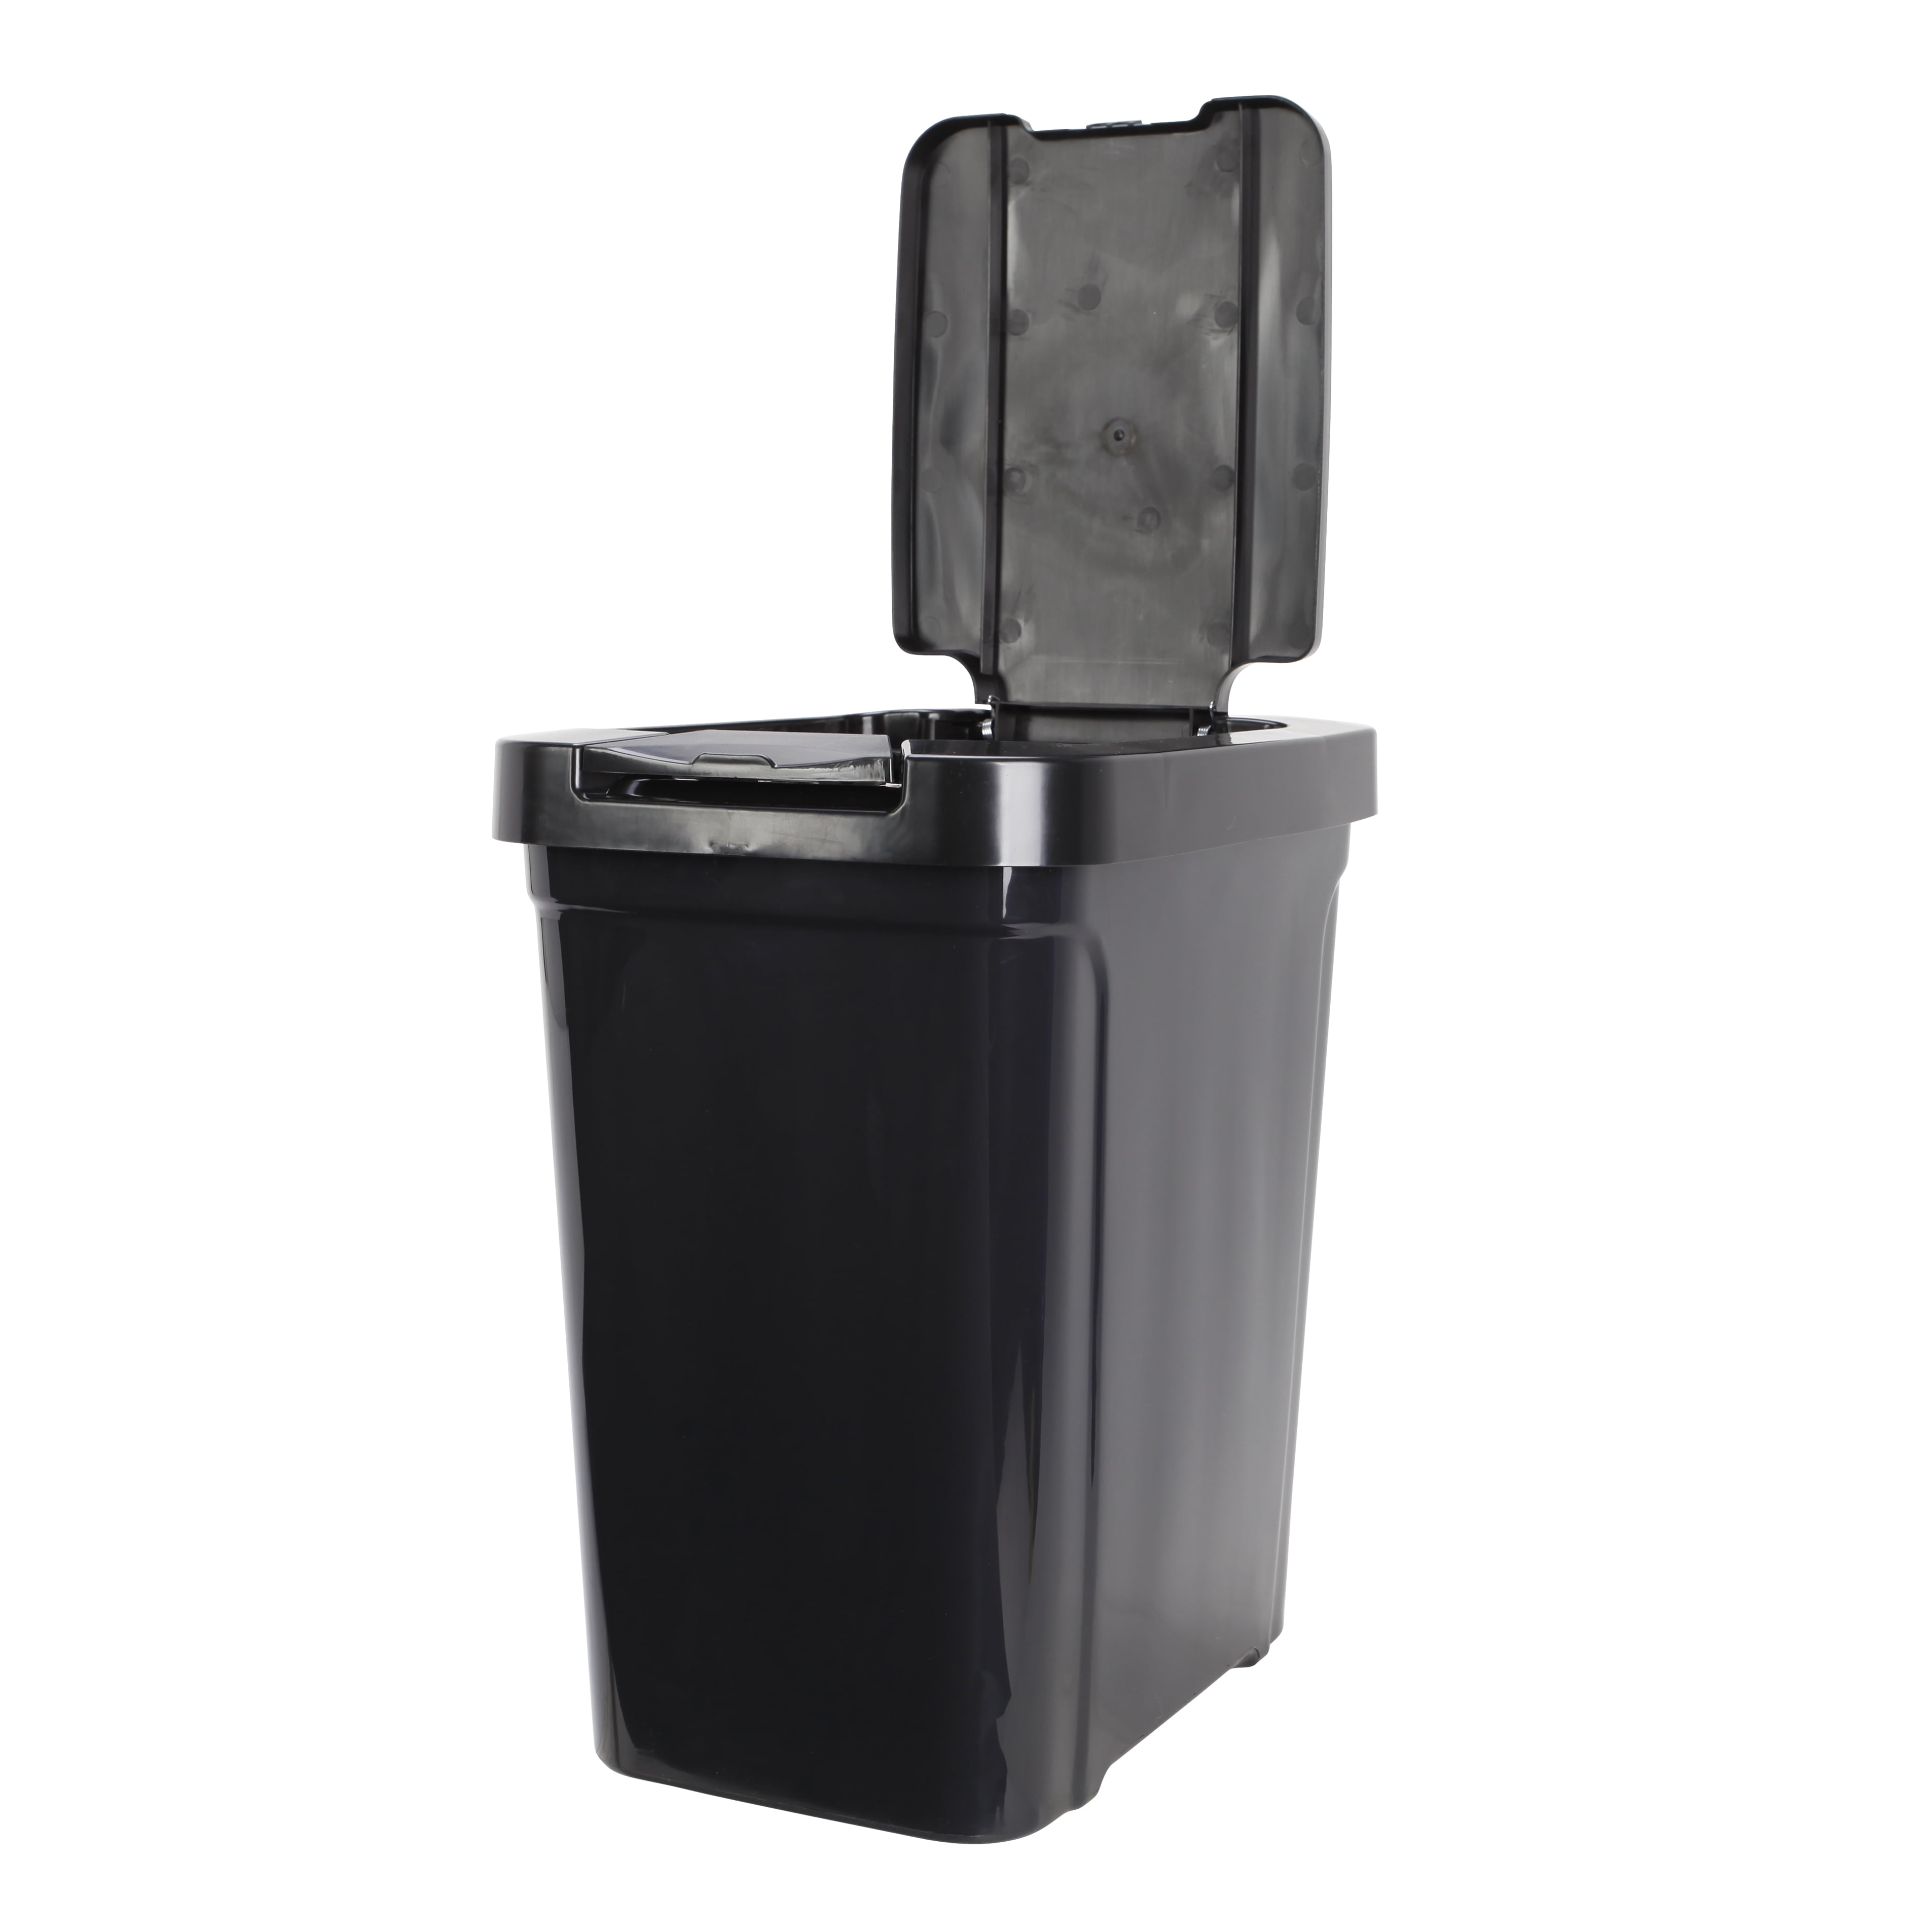 Homemaxs 1pc Push-Button Plastic Trash Can Convenient for Garbage Bags Silent Garbage Can Large Capacity Square Trash Can Stylish Living Room Kitchen